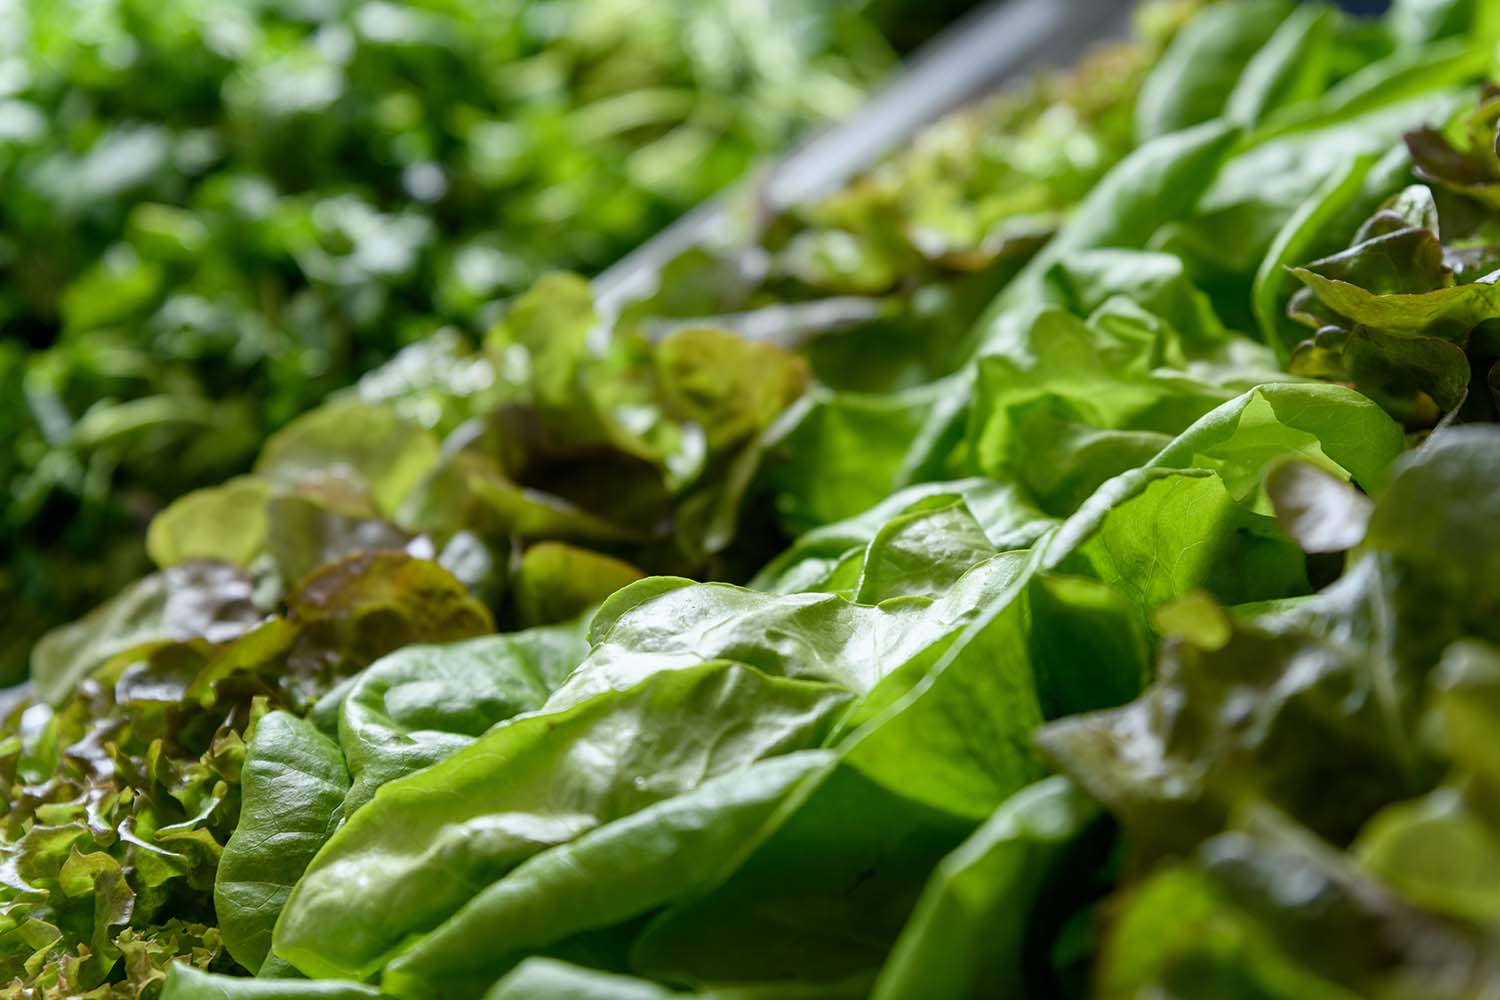 Georgia Tech researchers will use wastewater to grow produce like this lettuce, while using machine learning to calculate the ideal amount of nutrients, growing temperature and humidity needed to make each head of greens taste the same.

 